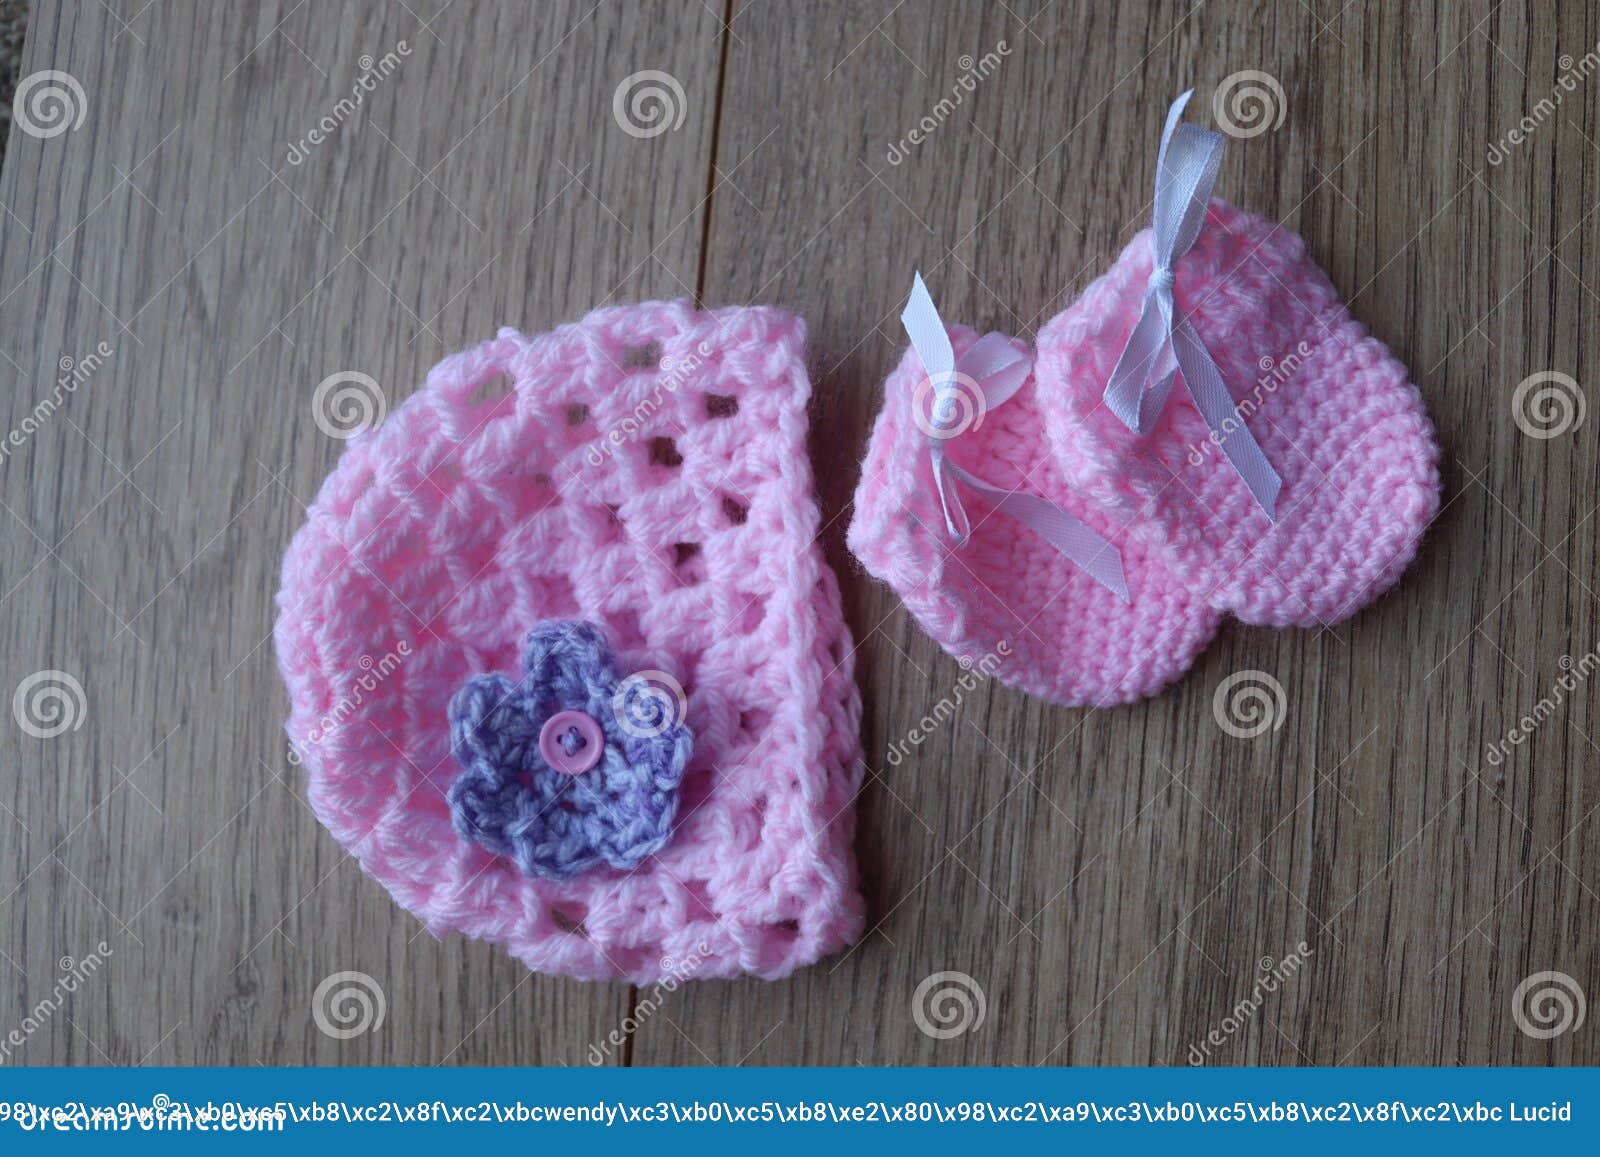 Premature Baby Items For Comfort And Warmth Stock Image